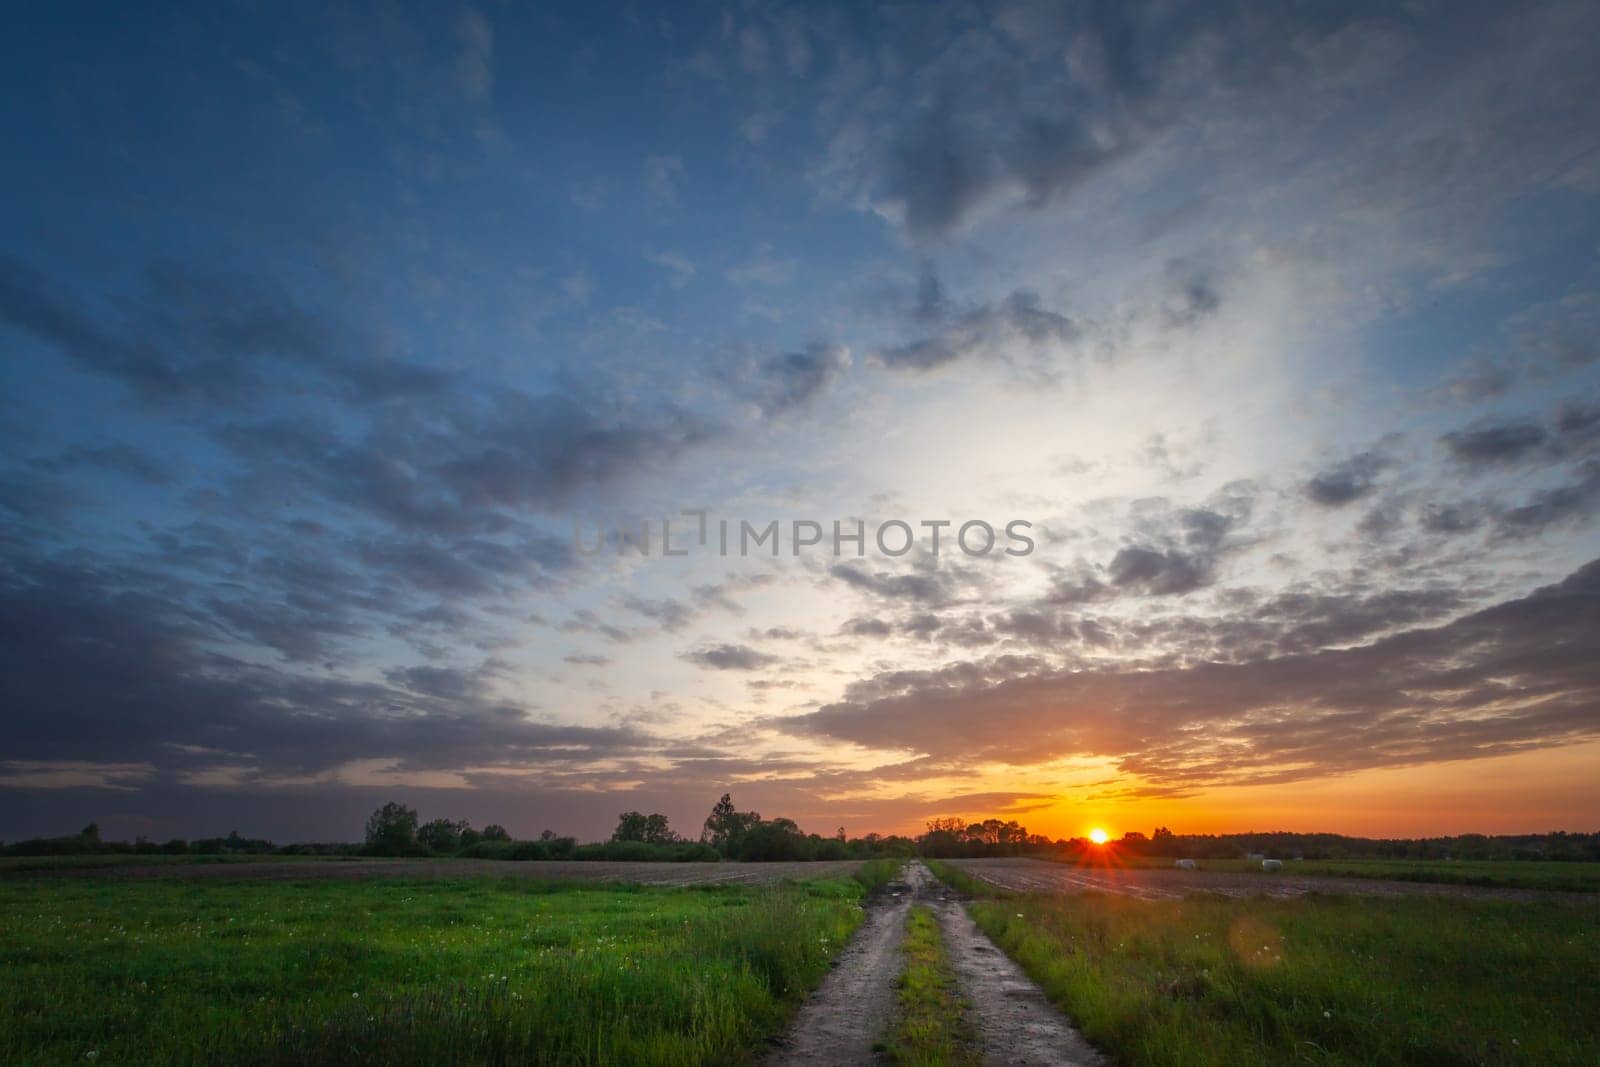 Sunset and evening clouds over meadow with dirt road by darekb22